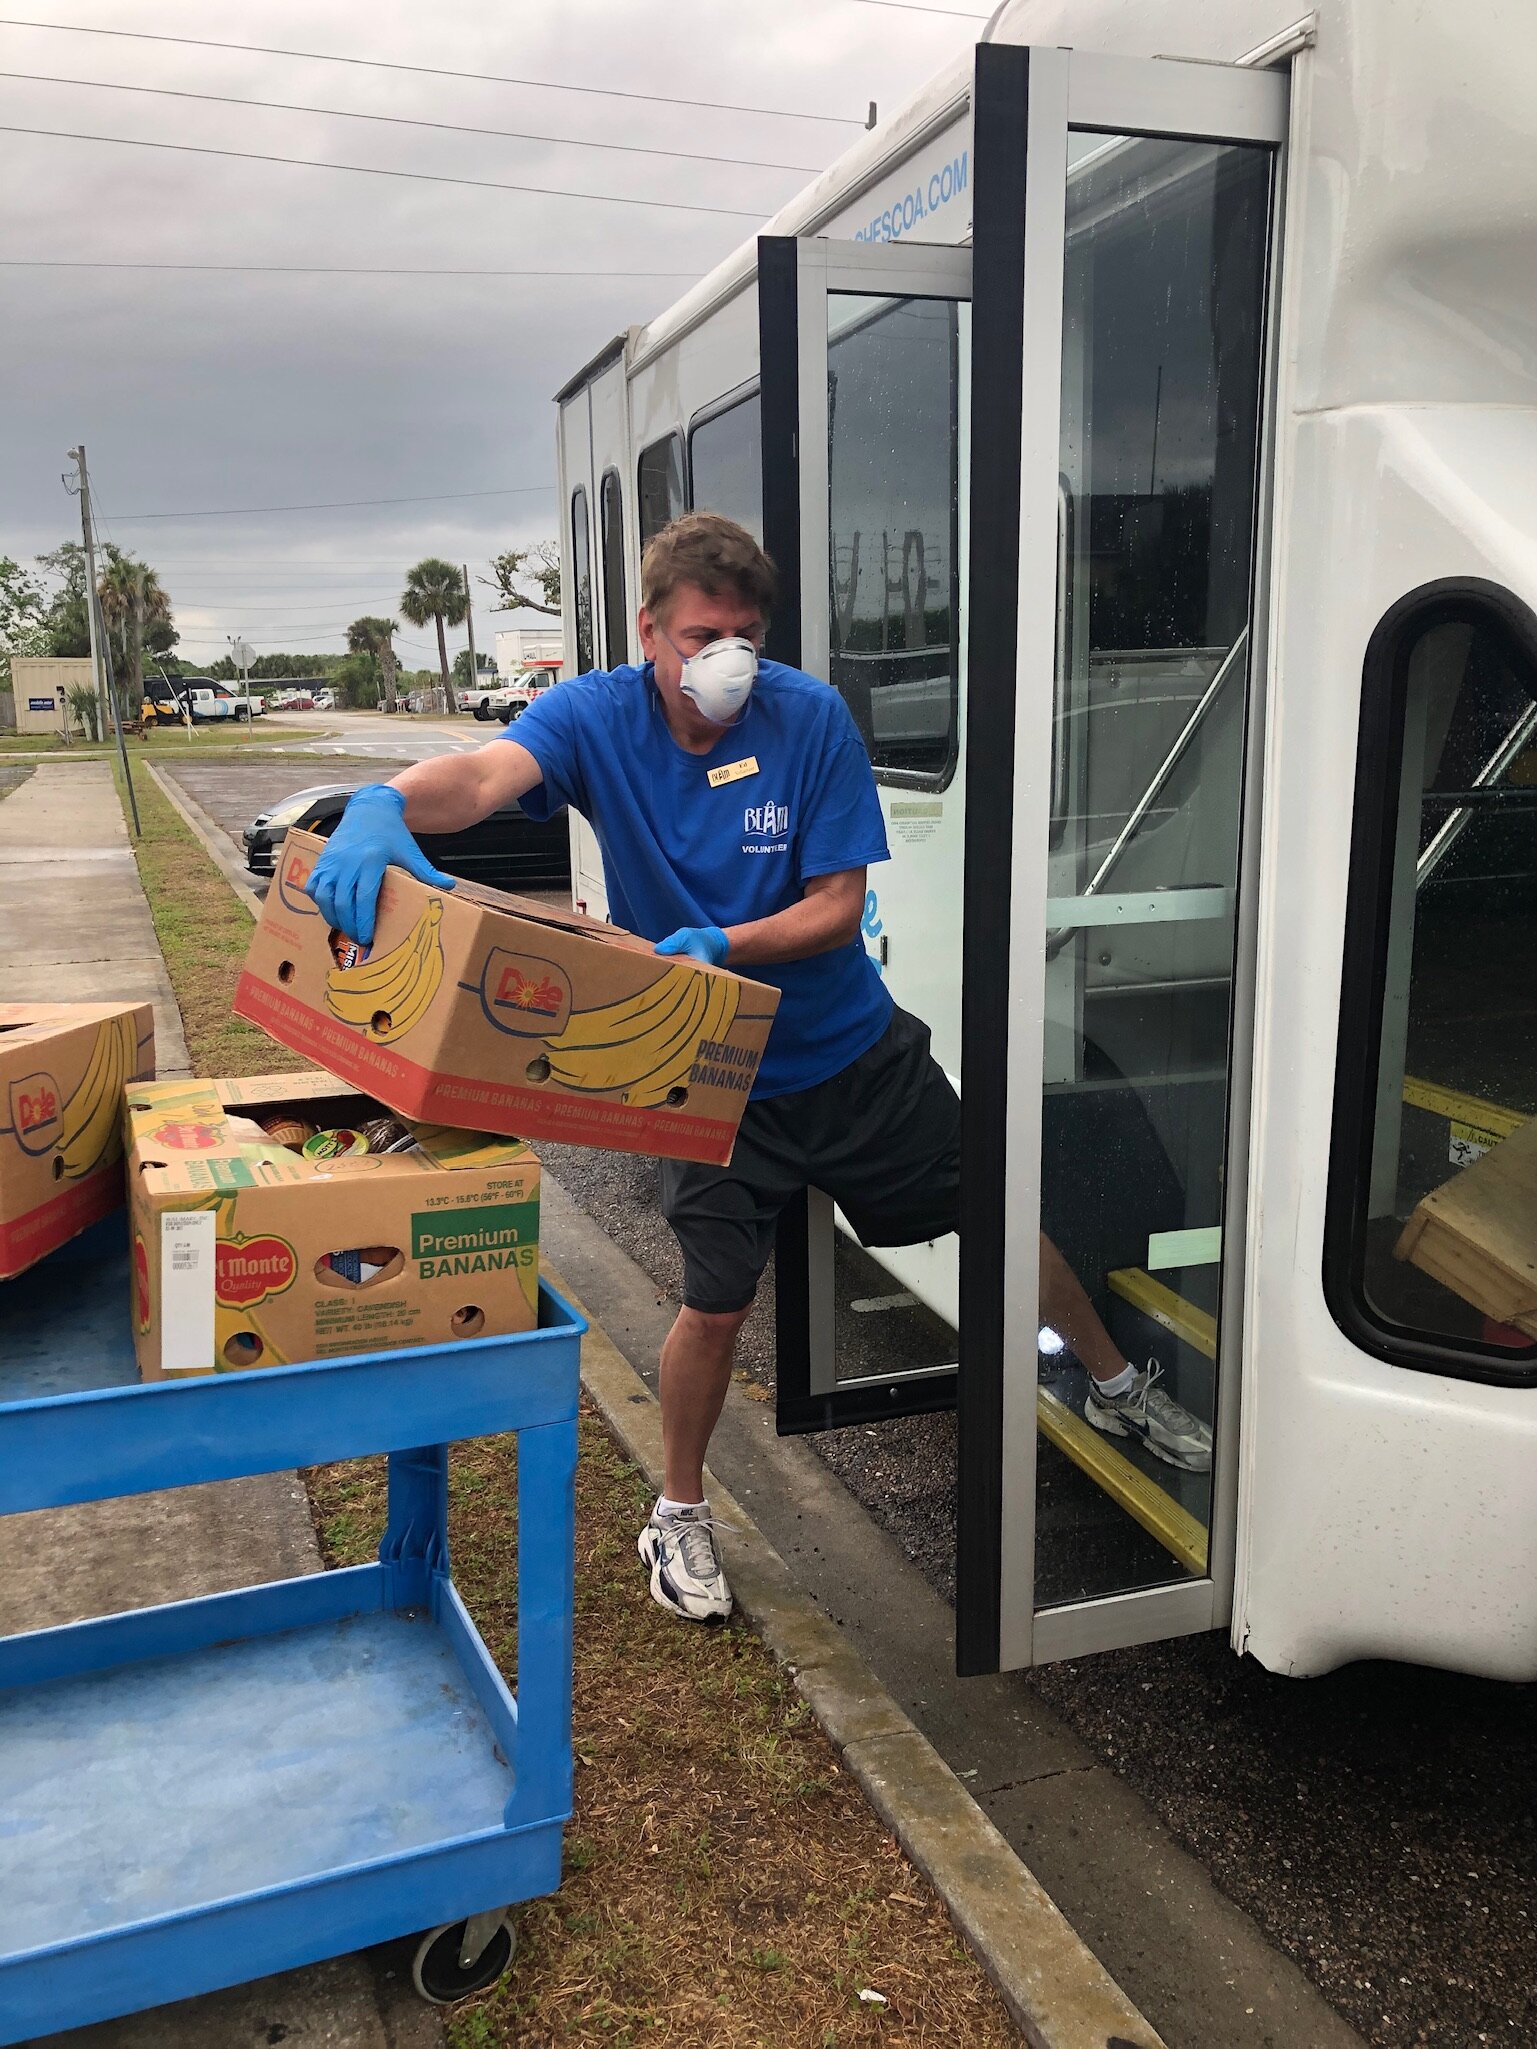 BEAM Volunteer loads groceries and meal kits for seniors and high-risk individuals, unable to leave home, into the Beaches Dial-a-Ride bus. These groceries will be delivered to our client’s home, free of charge, from BEAM’s Jacksonville Beach Pantry.